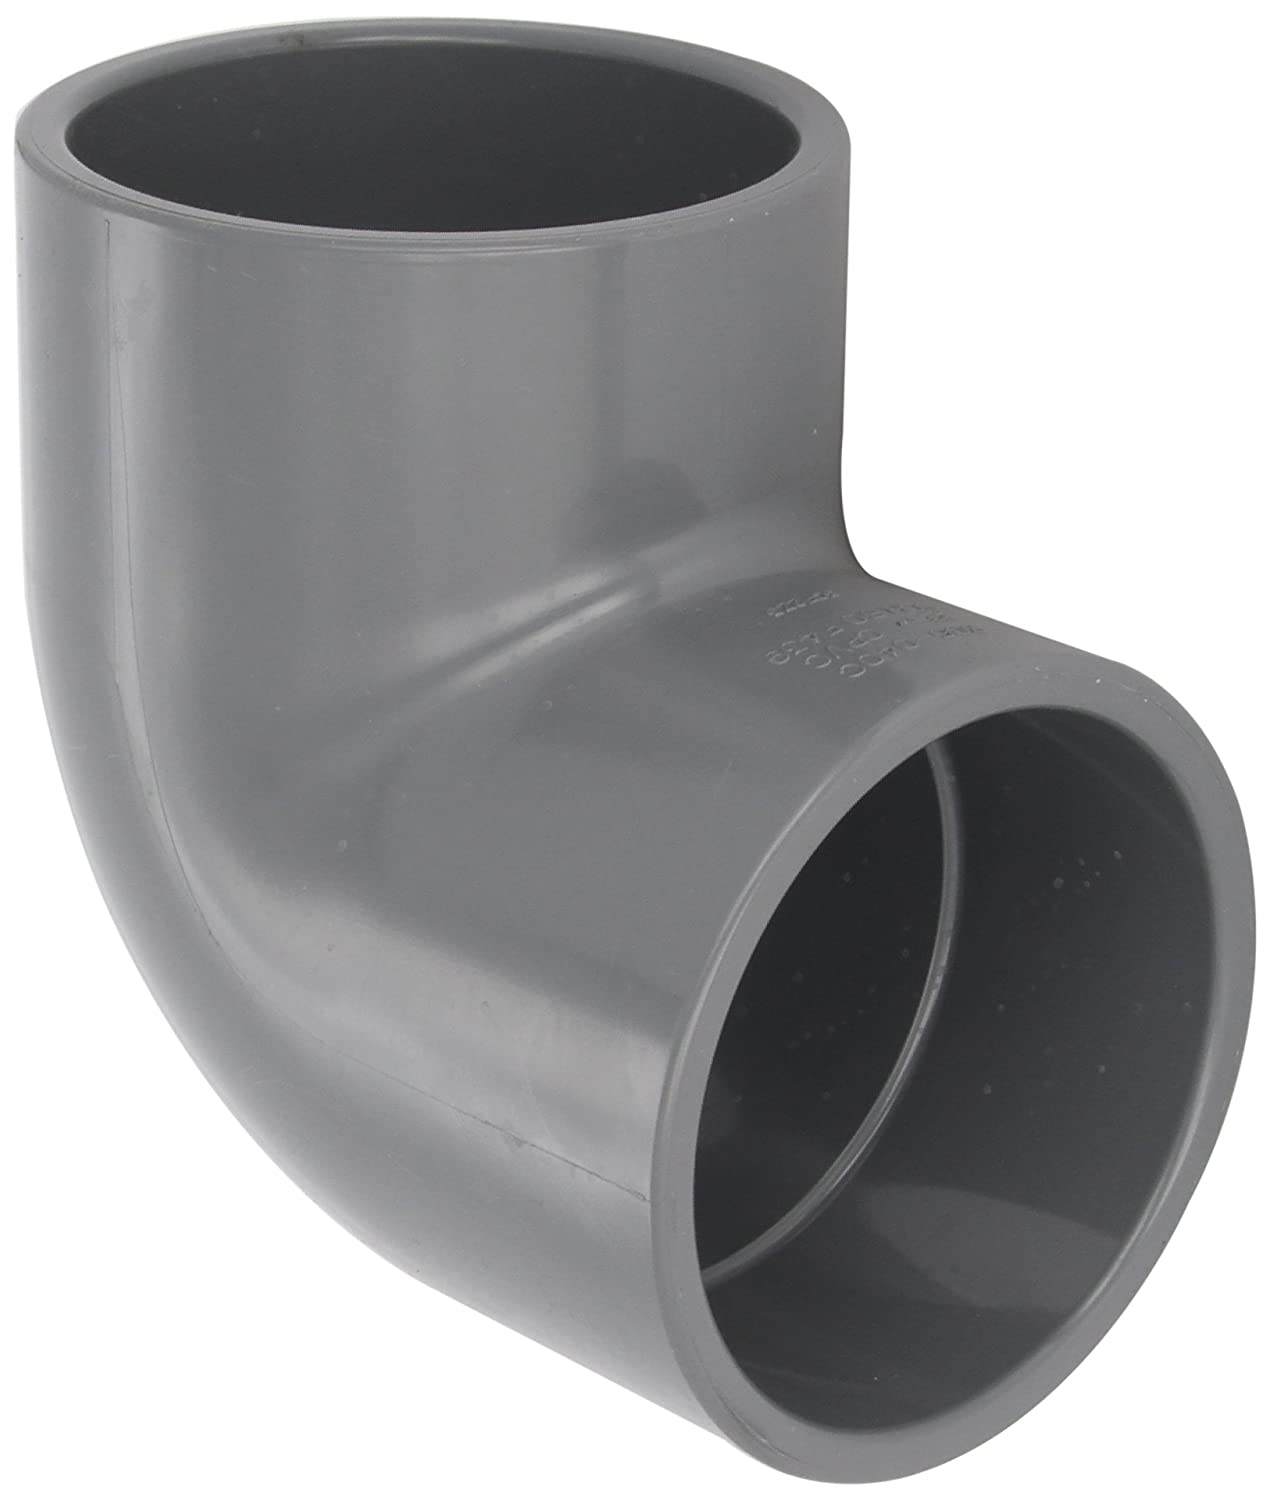 Spears 806-012C - CPVC Pipe Fitting, 90 Degree Elbow, Schedule 80, 1-1/4" Socket